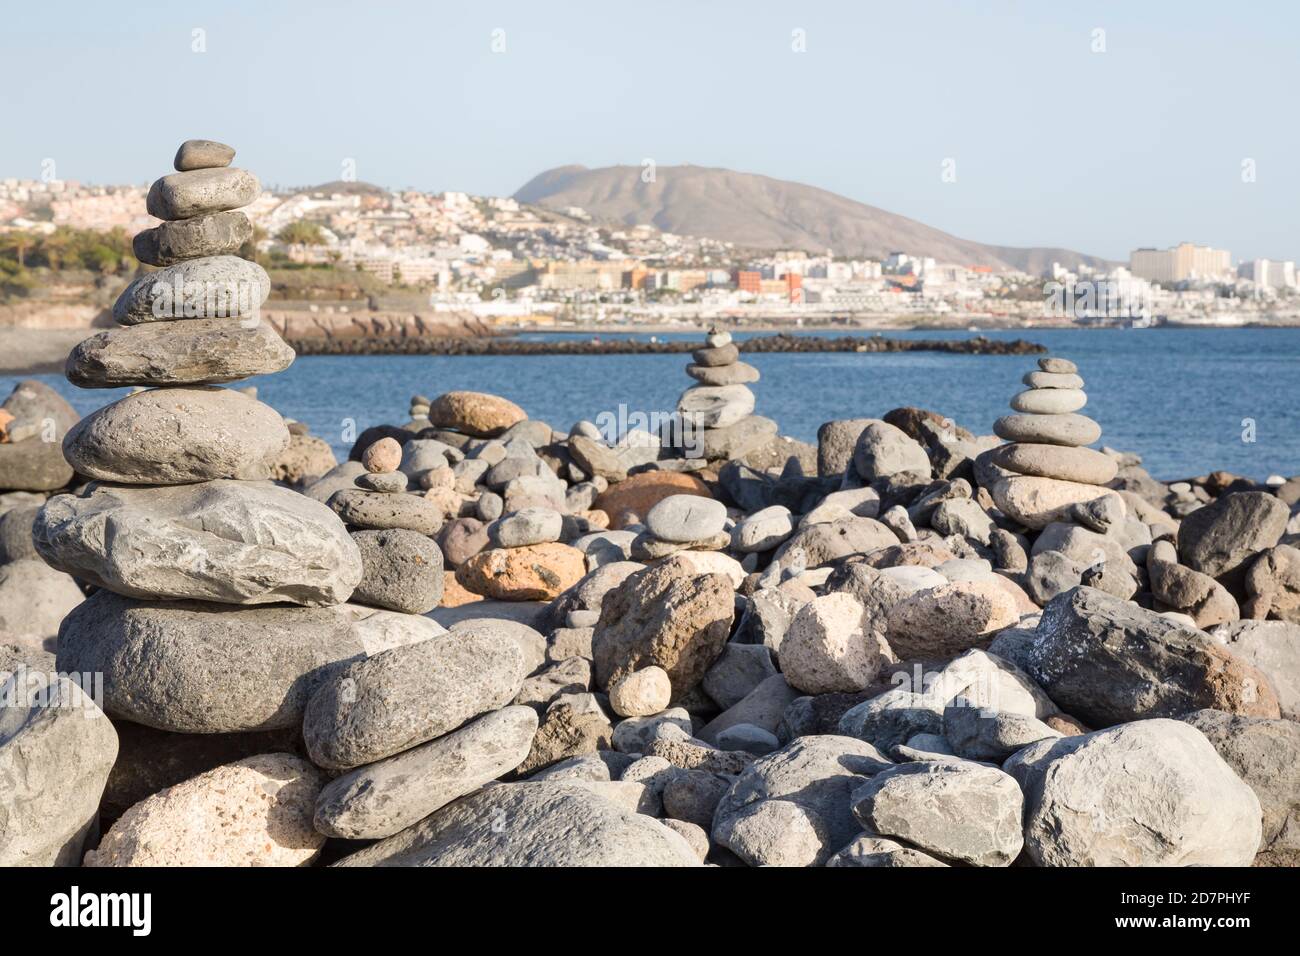 Piles of stones balanced, stacked in a pyramid on a beach in Costa Adeje, Tenerife, Canary Islands Stock Photo